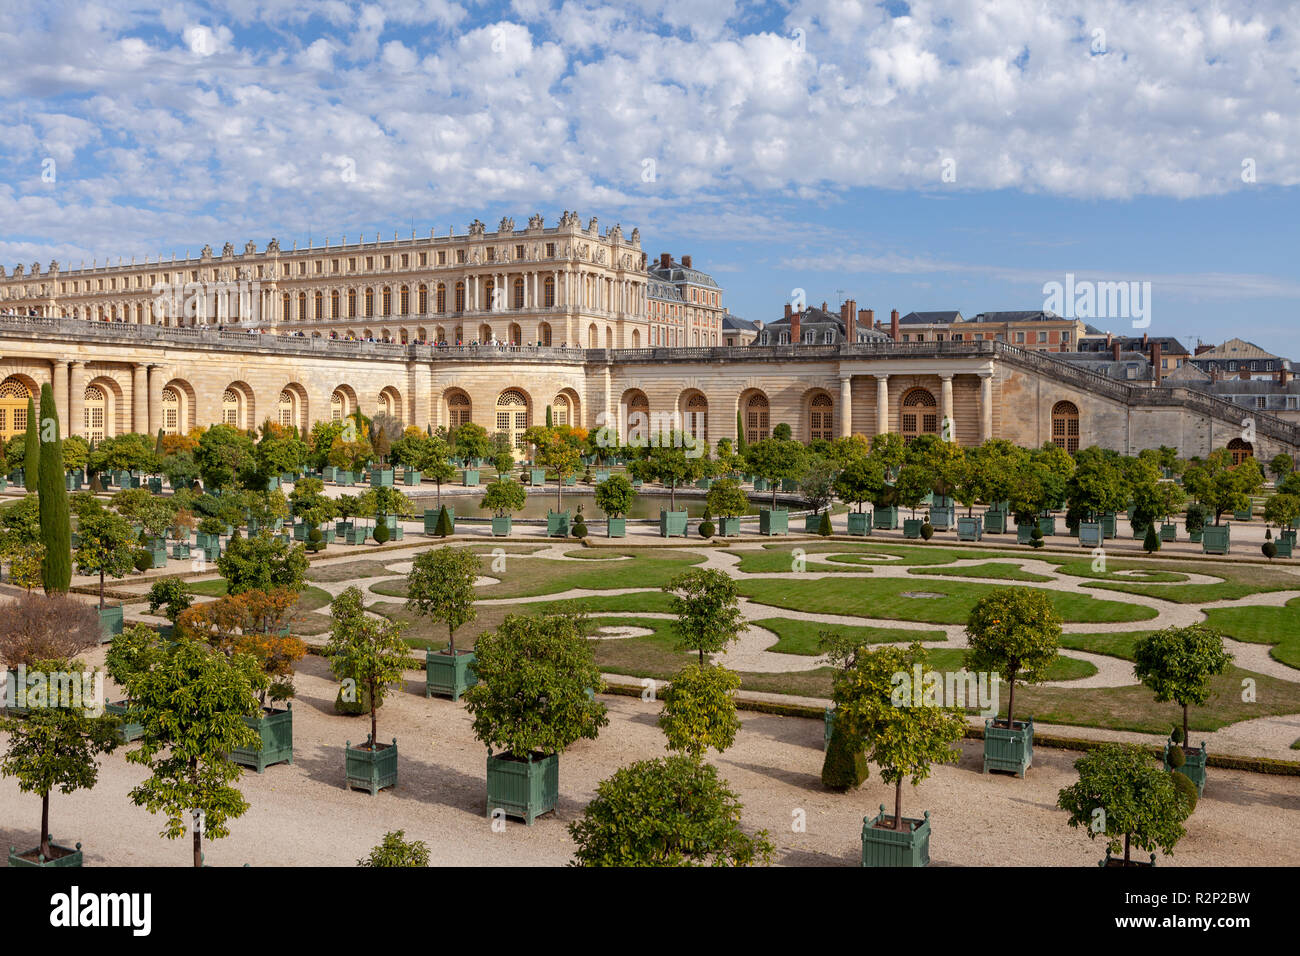 Palace Of Versailles And Orangerie Garden Of The Palace Of Versailles Versailles France Stock Photo Alamy